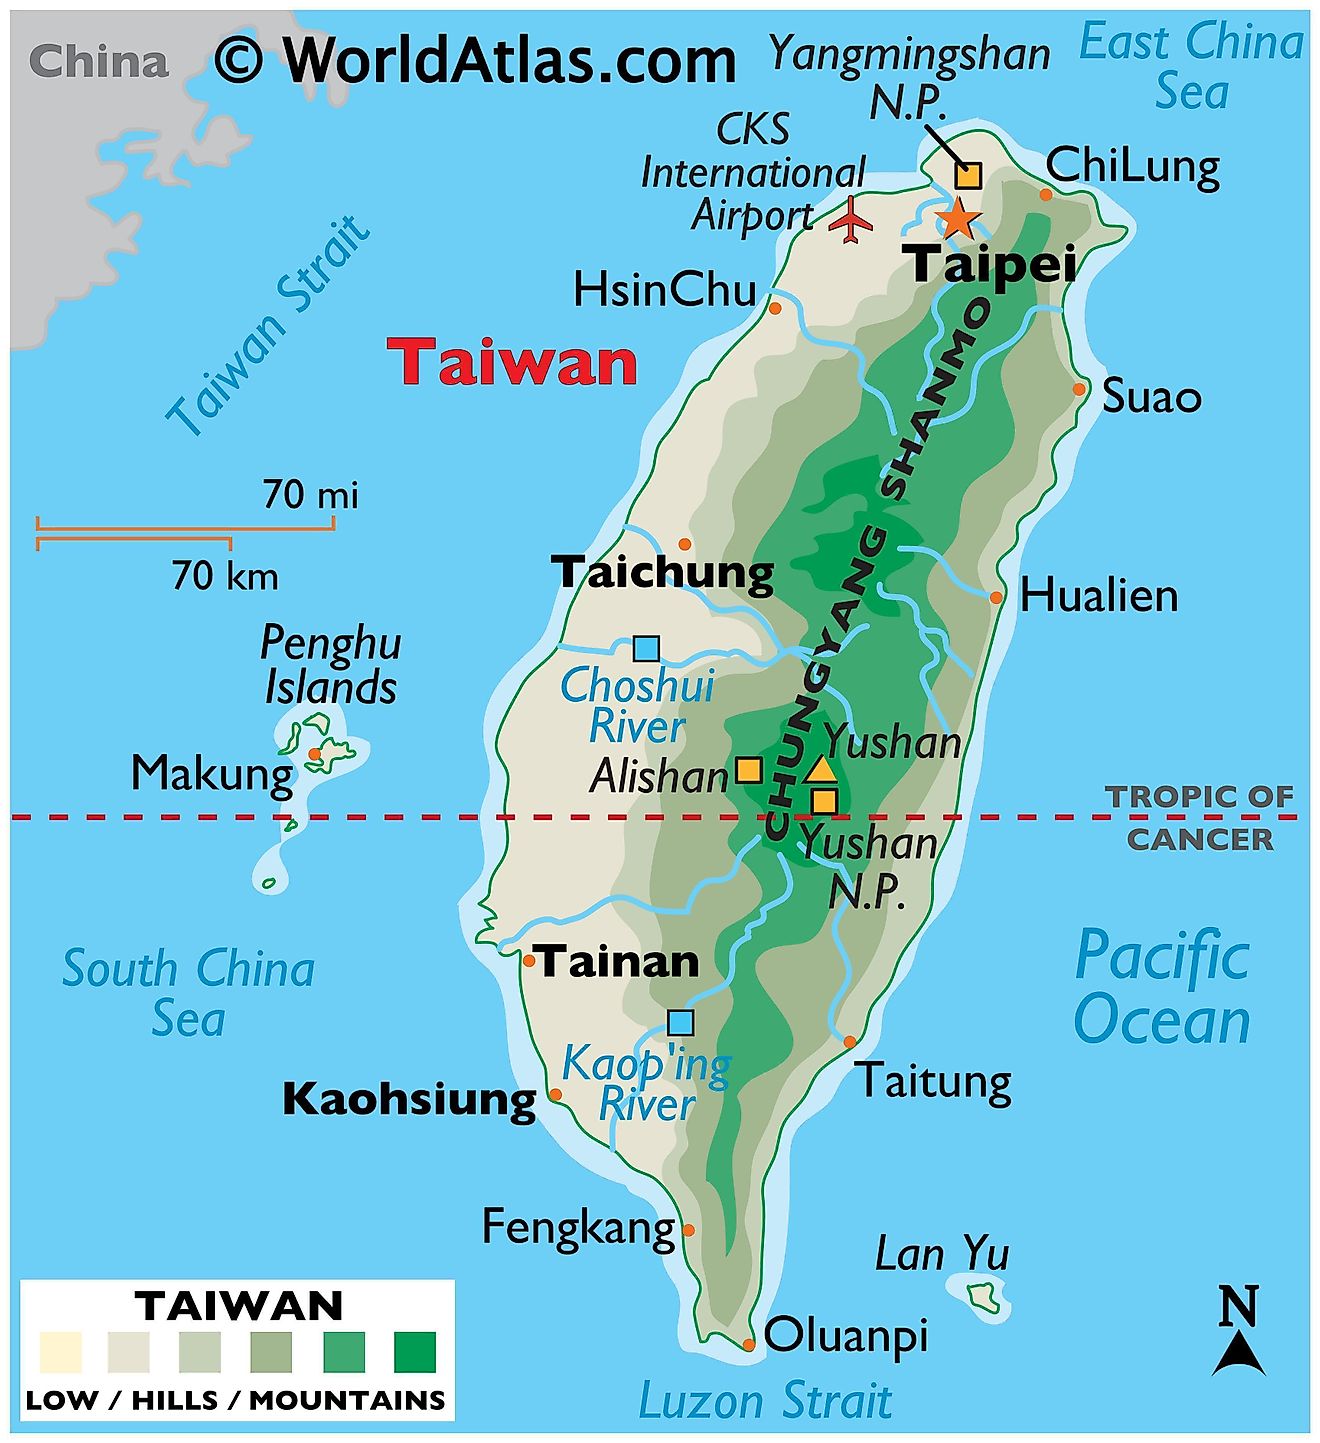 Physical Map of Taiwan with state boundaries, relief, major rivers, lakes, highland areas, highest peak, important cities, and more.